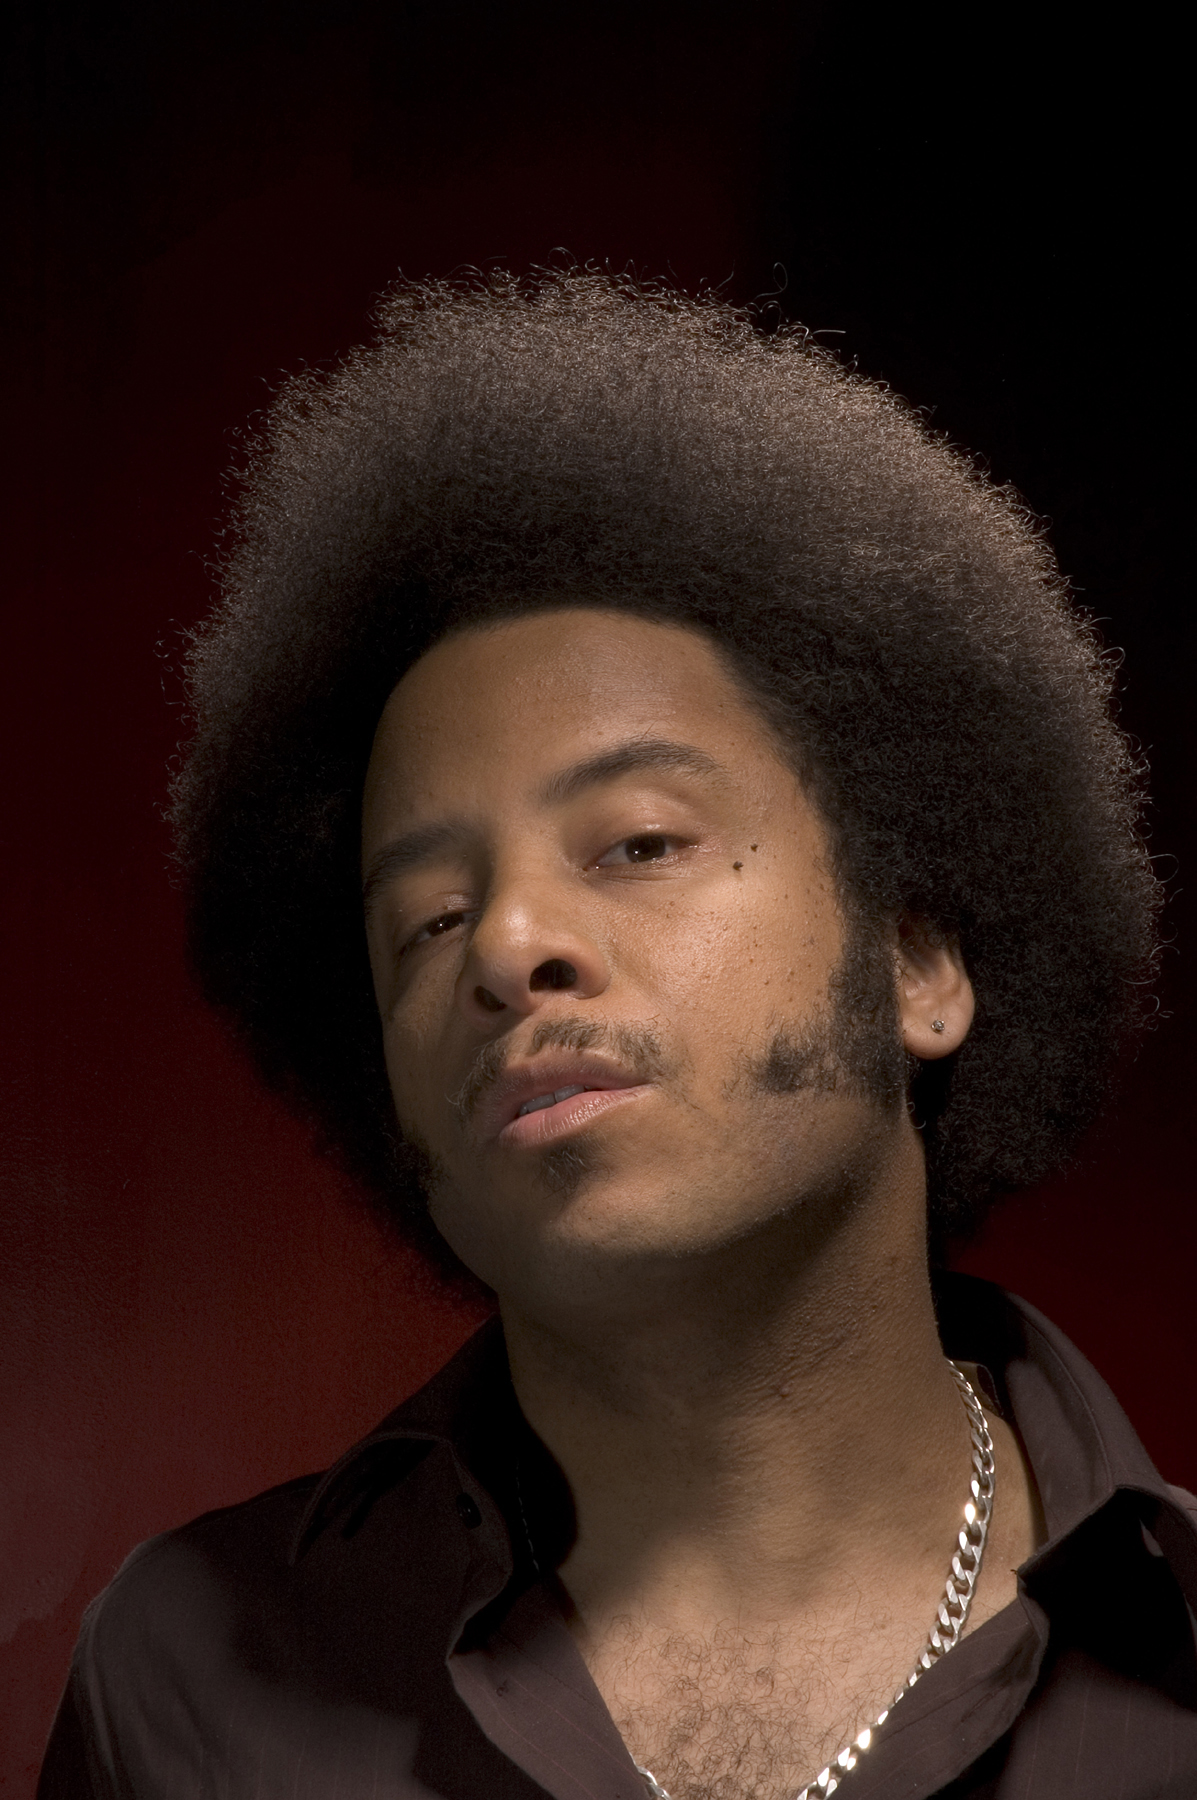 Boots Riley by Alexander Warnow